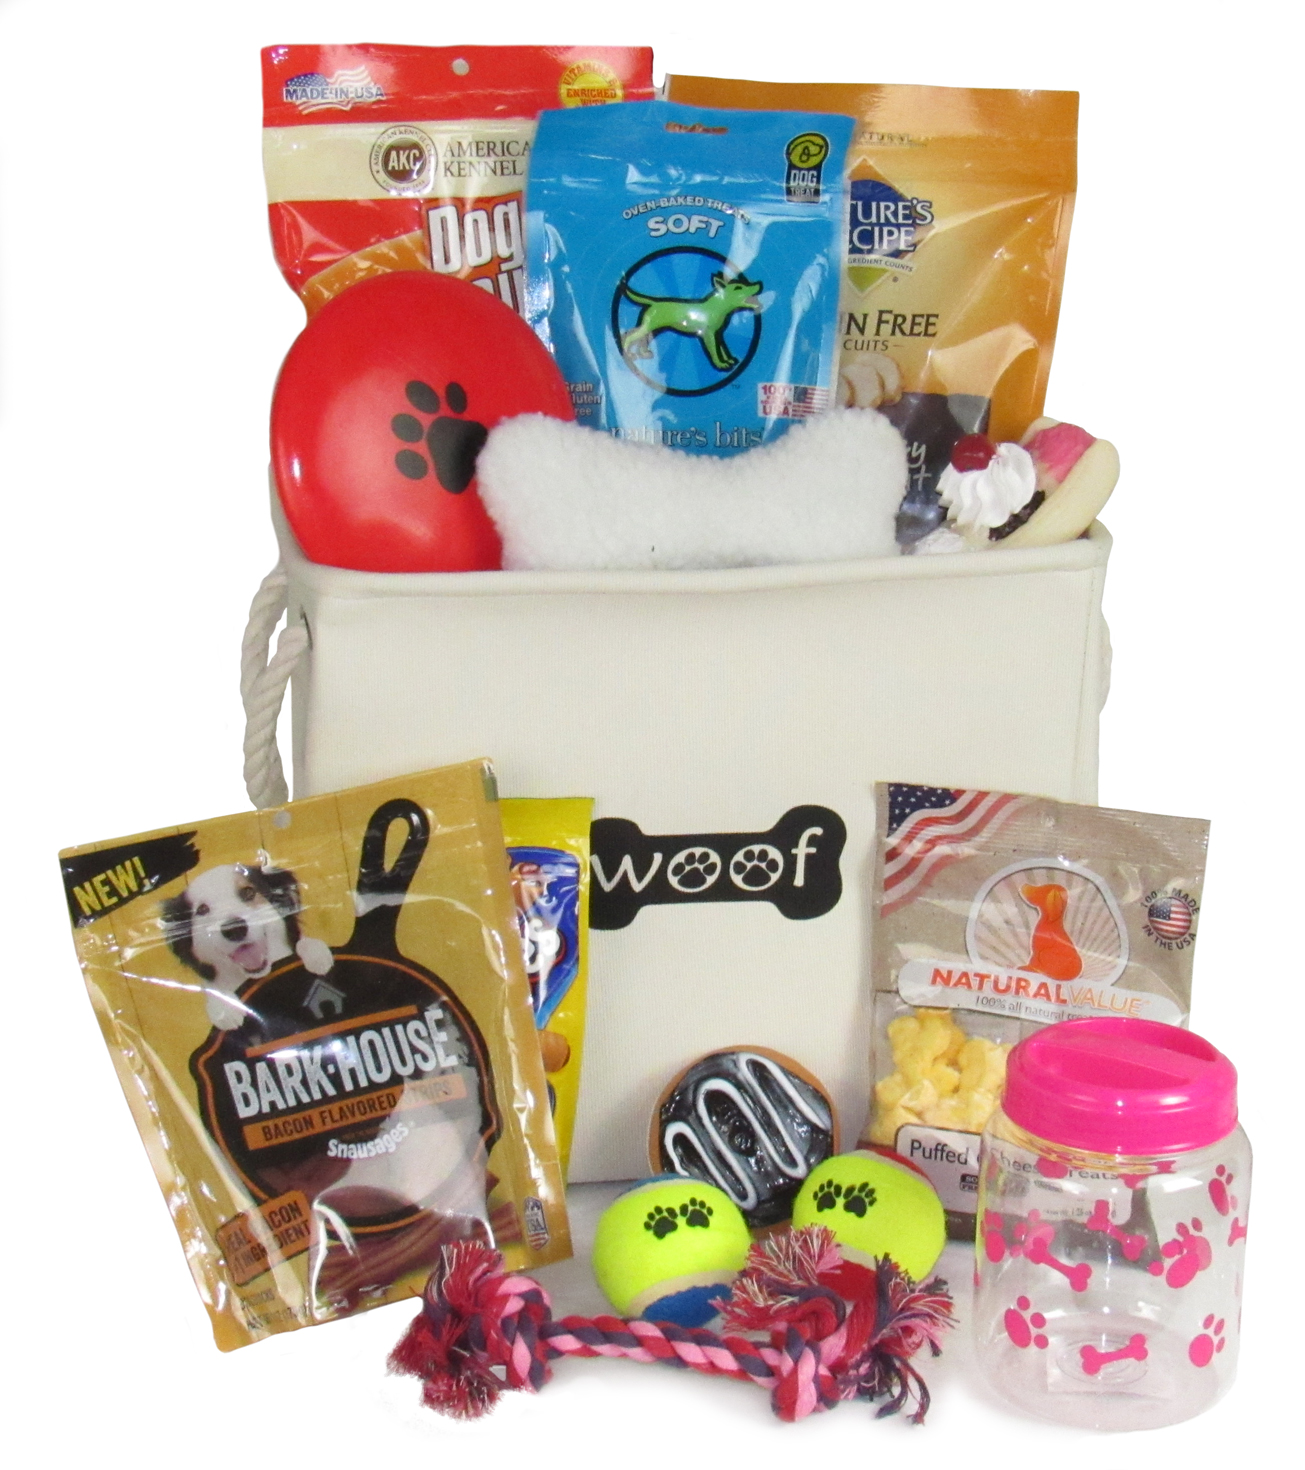 Toys and Treats Basket